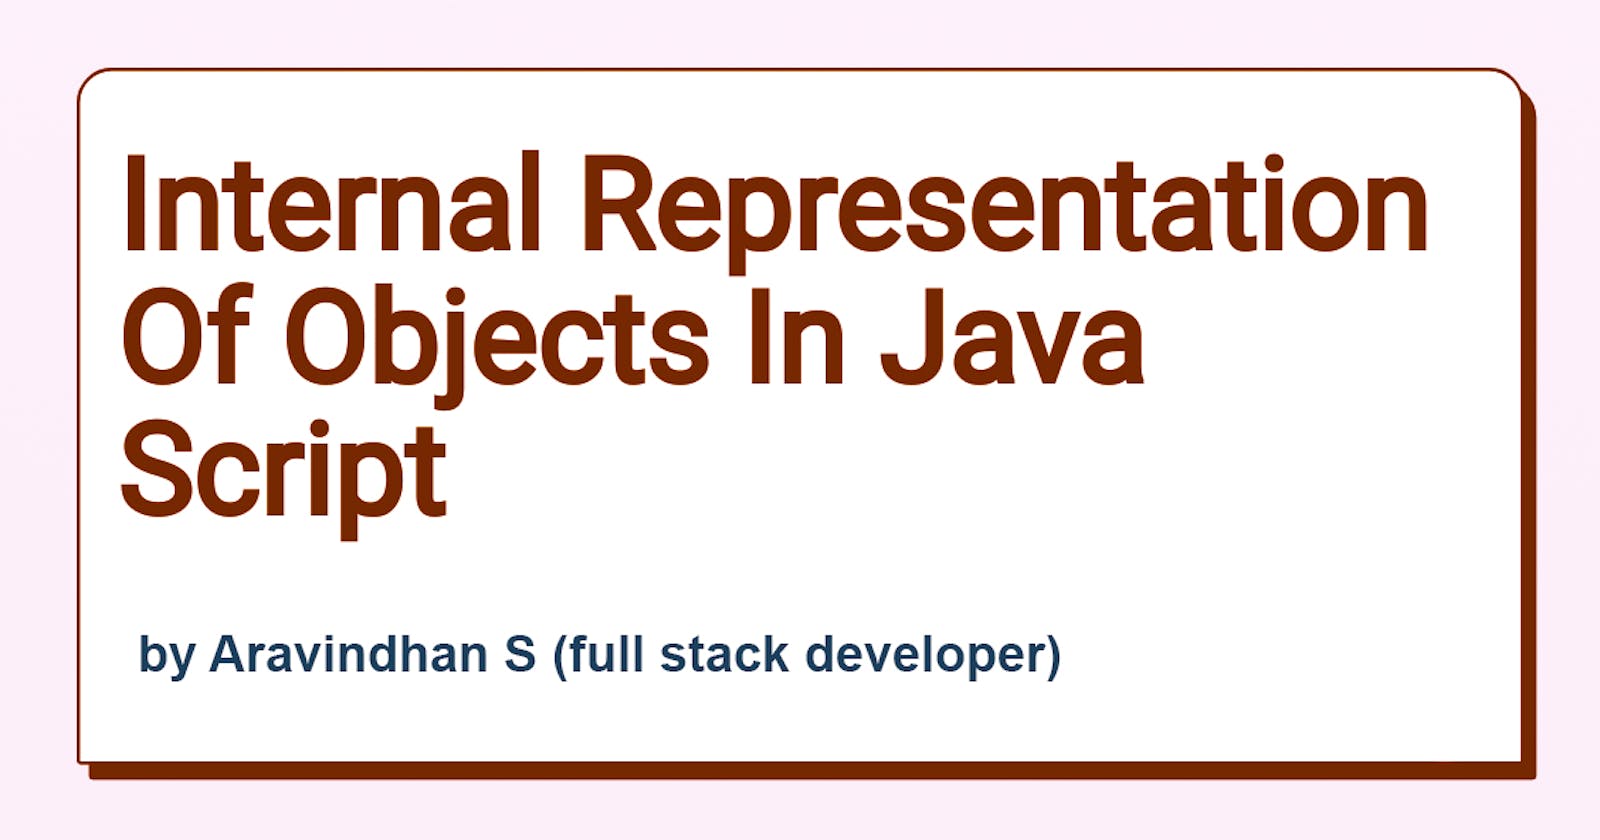 Objects in JavaScript and their Internal Representation